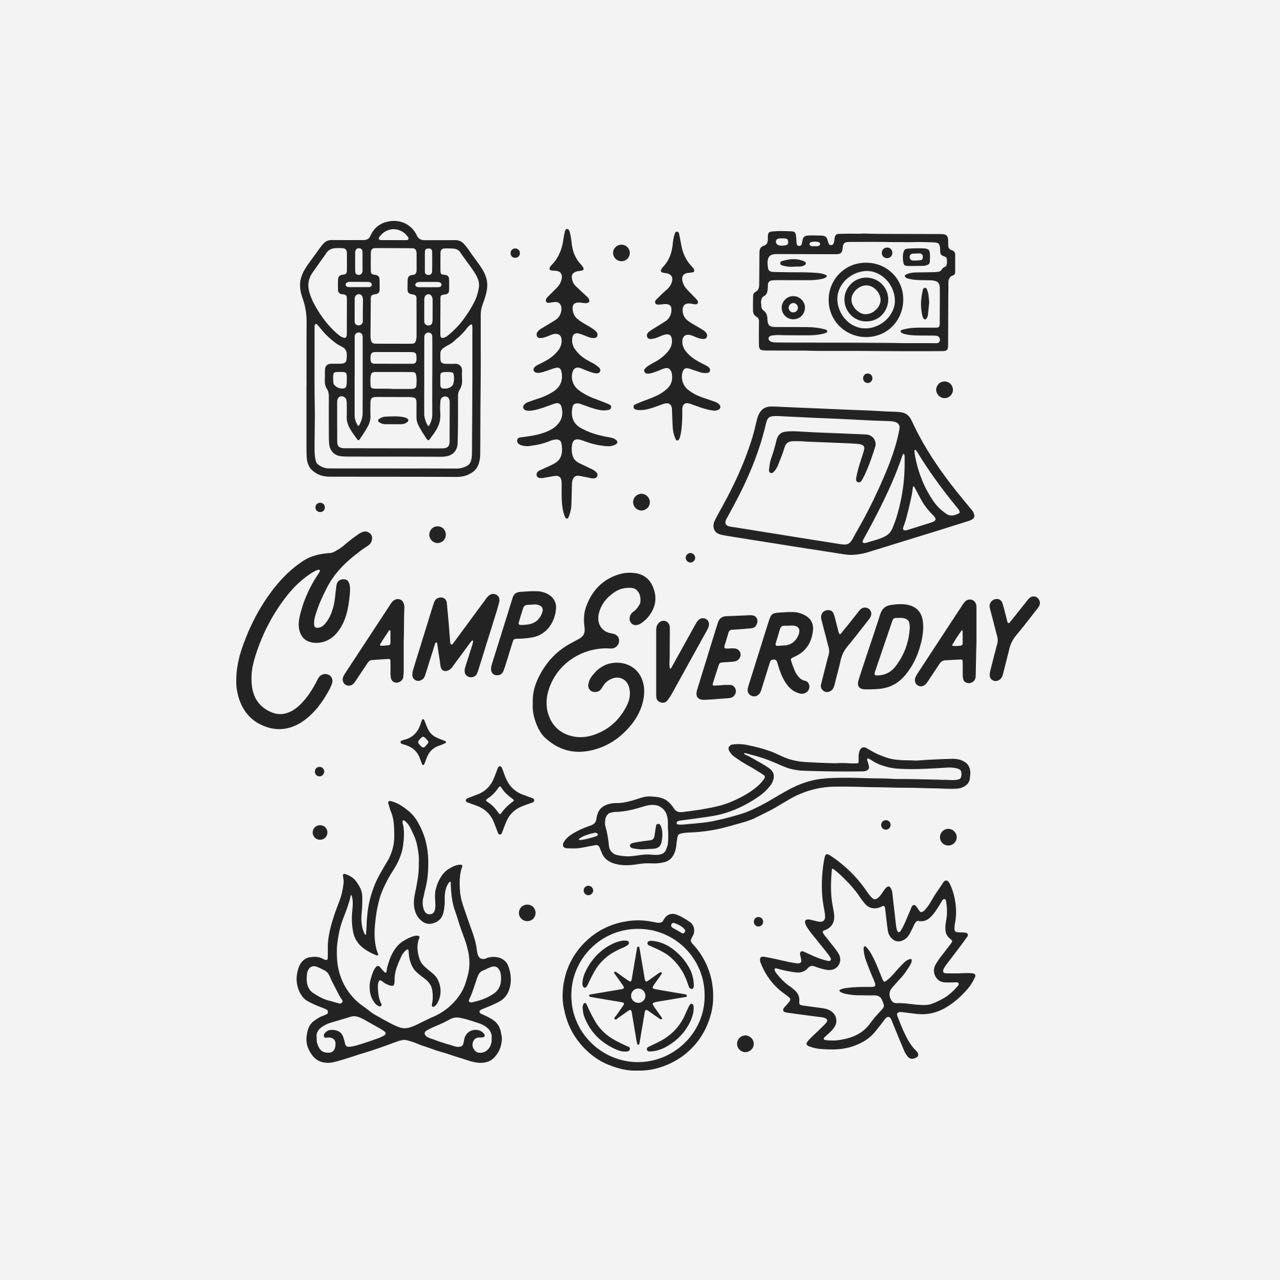 Drawing Art Logo - Shop Camp Everyday for more! #camp#fire#drawing#logo#design#shop ...